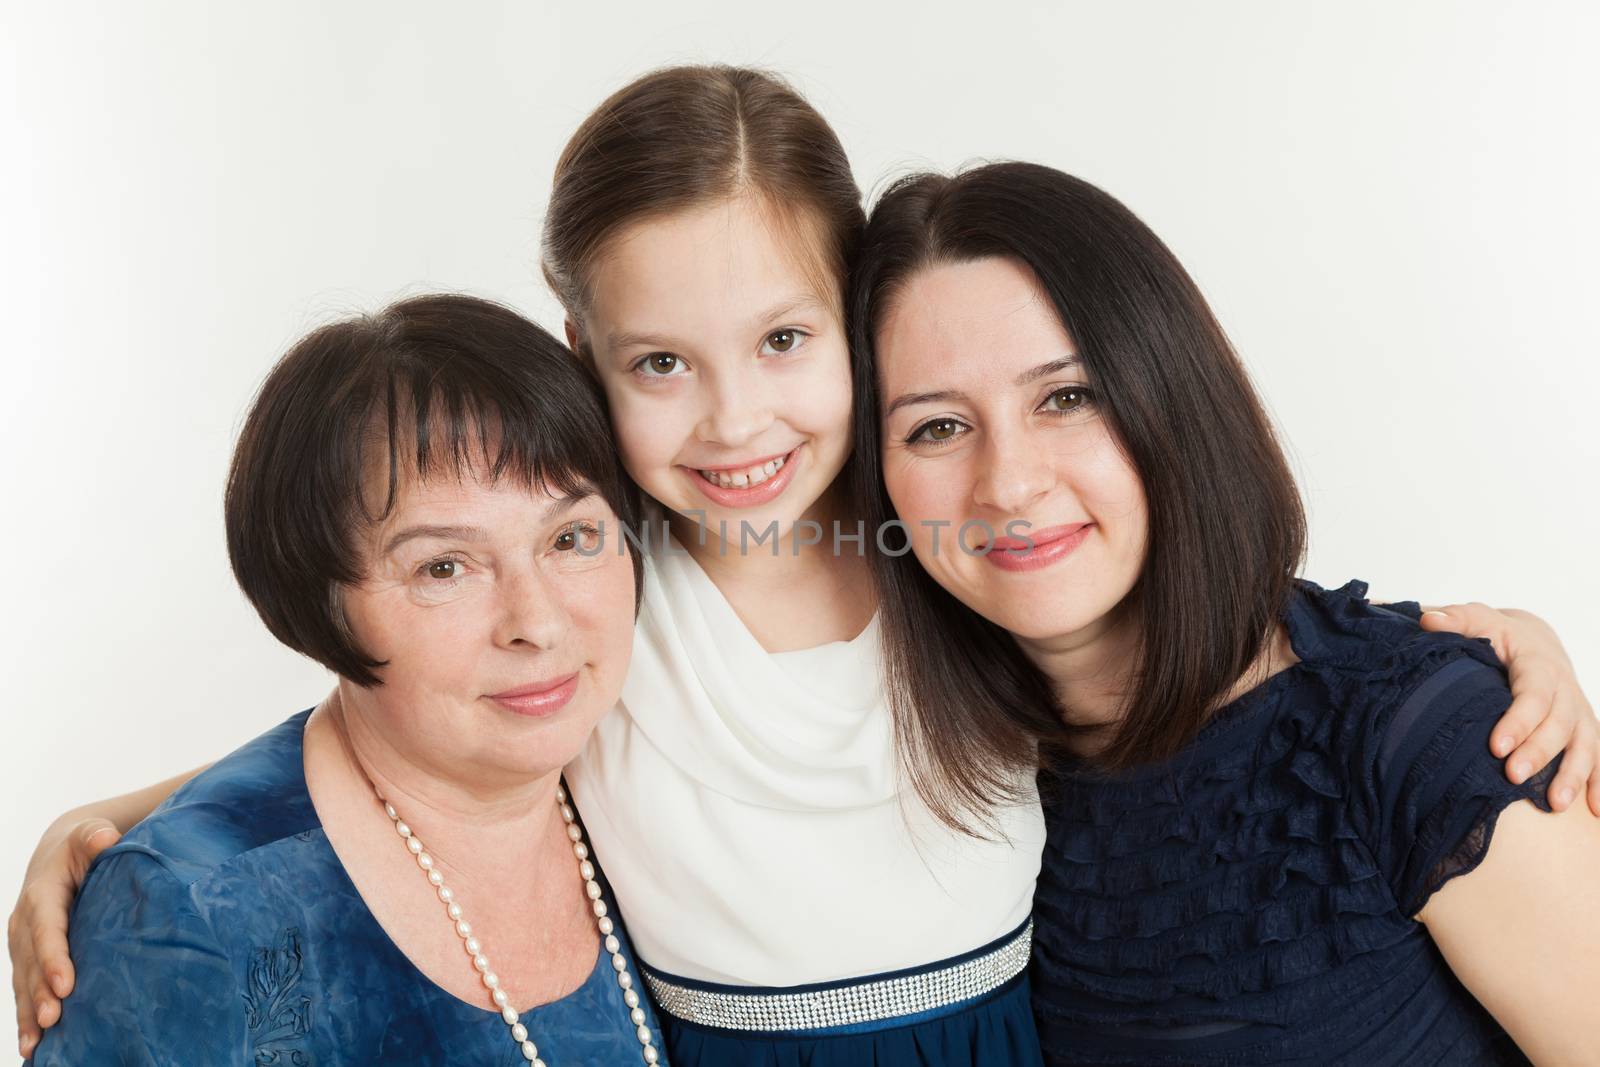 The granddaughter embraces the grandmother and mother on a white background